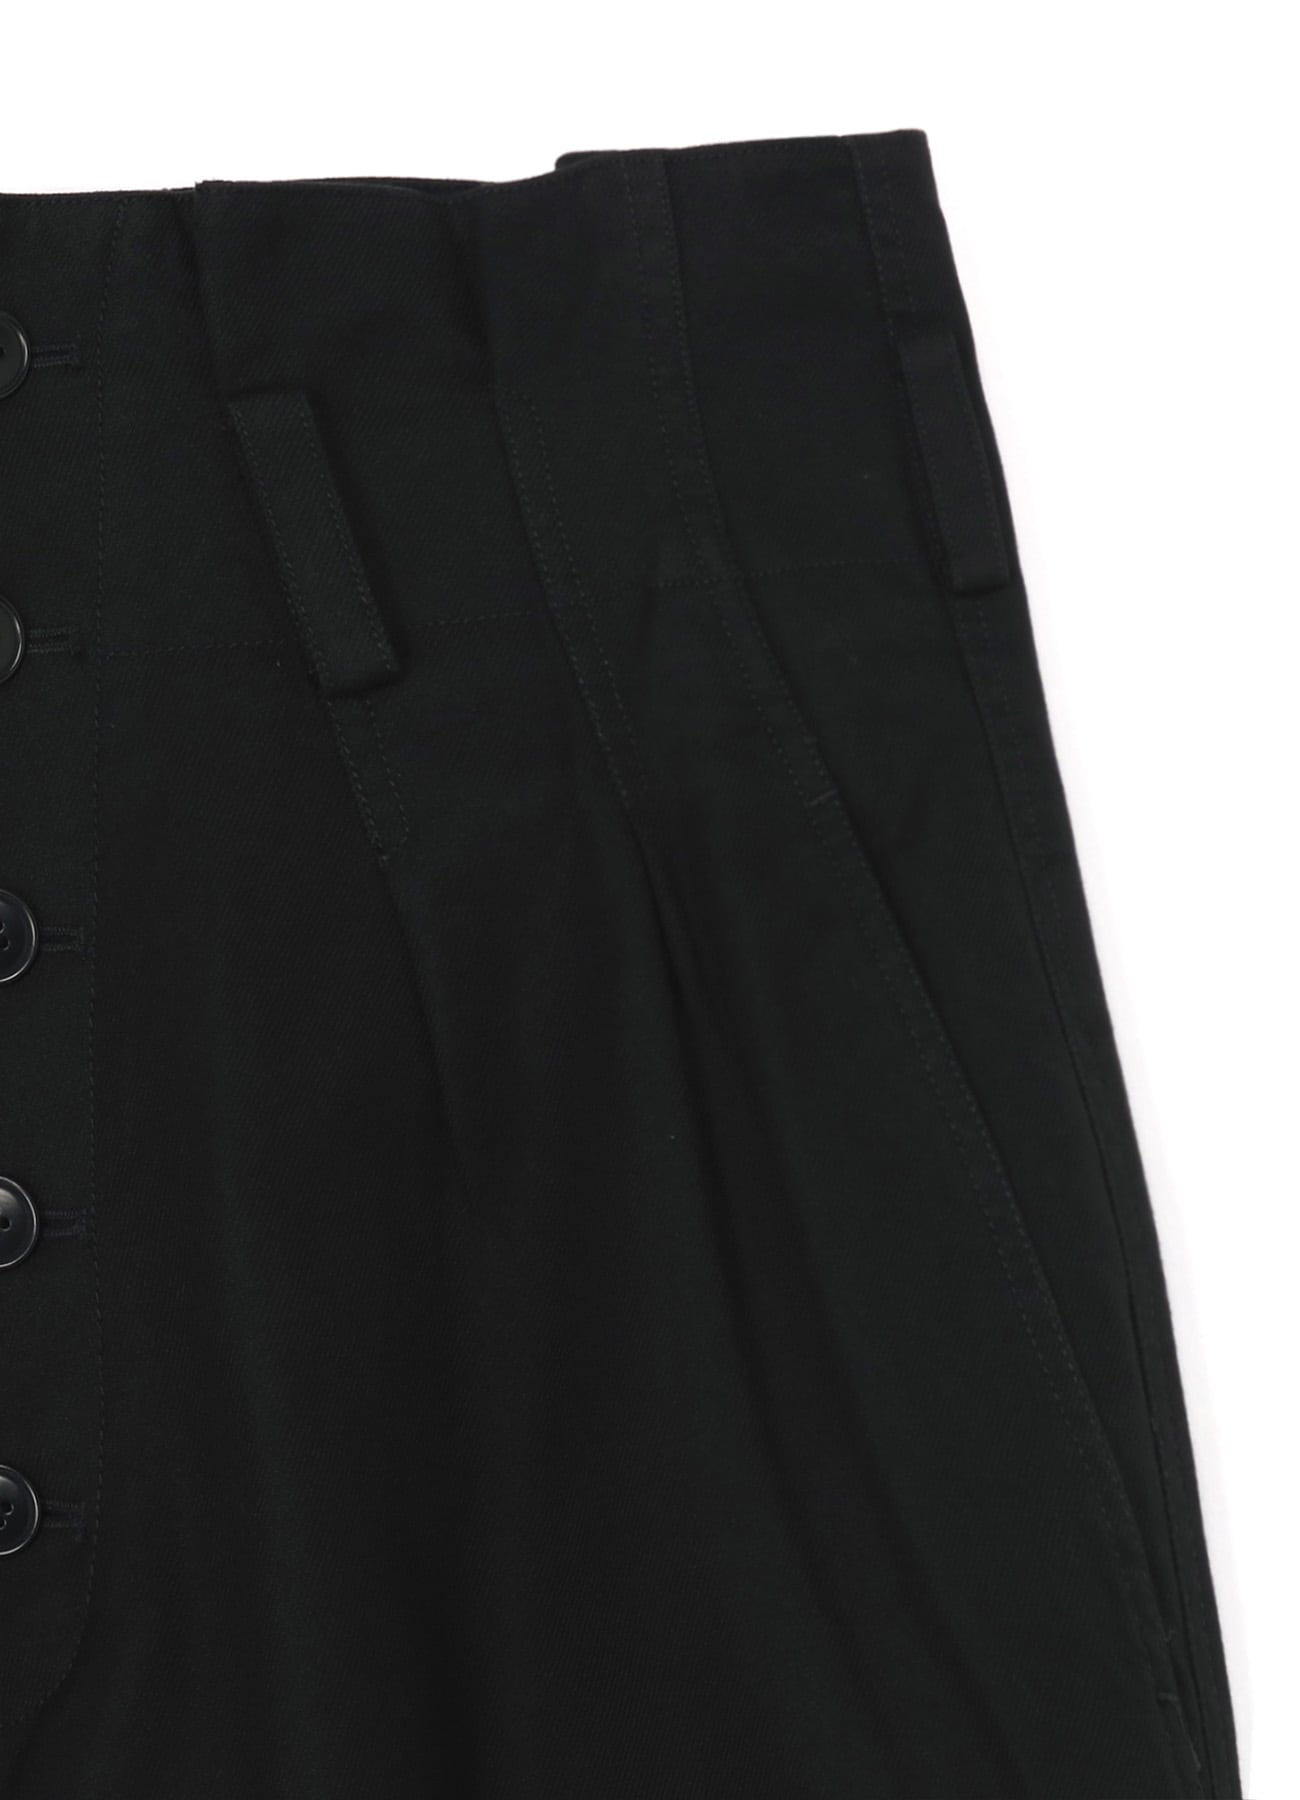 FRENCH WORKER SURGE SAROUEL PANTS WITH DEEP RISE AND BUTTON FLY DESIGN